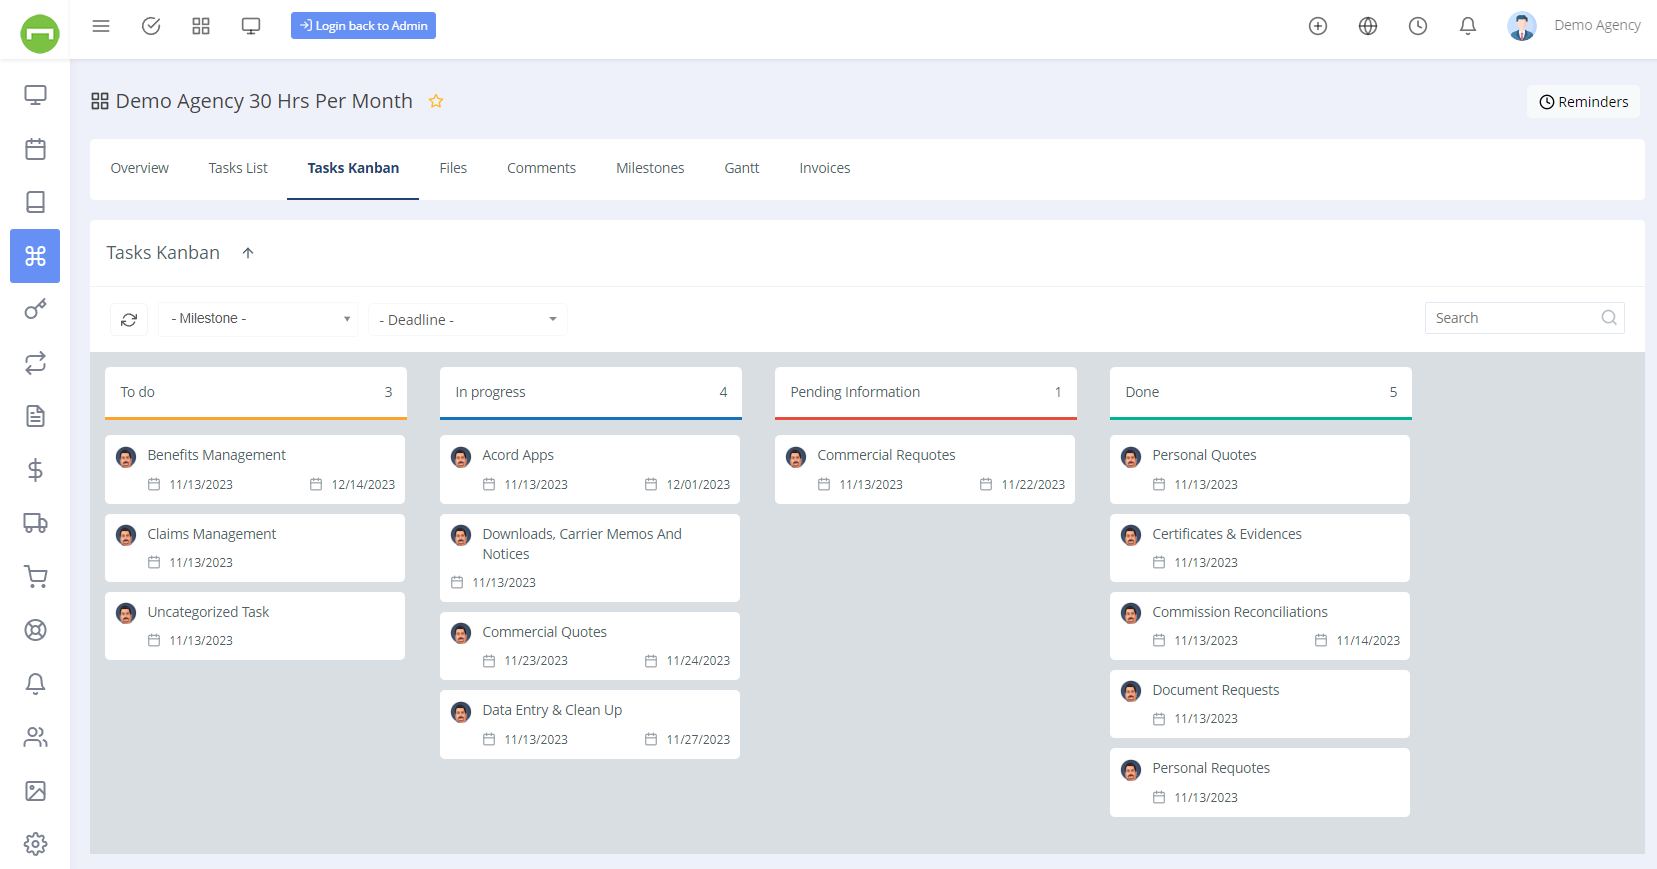 Real-Time Task Tracking: Monitor your tasks' progress on our interactive taskboard